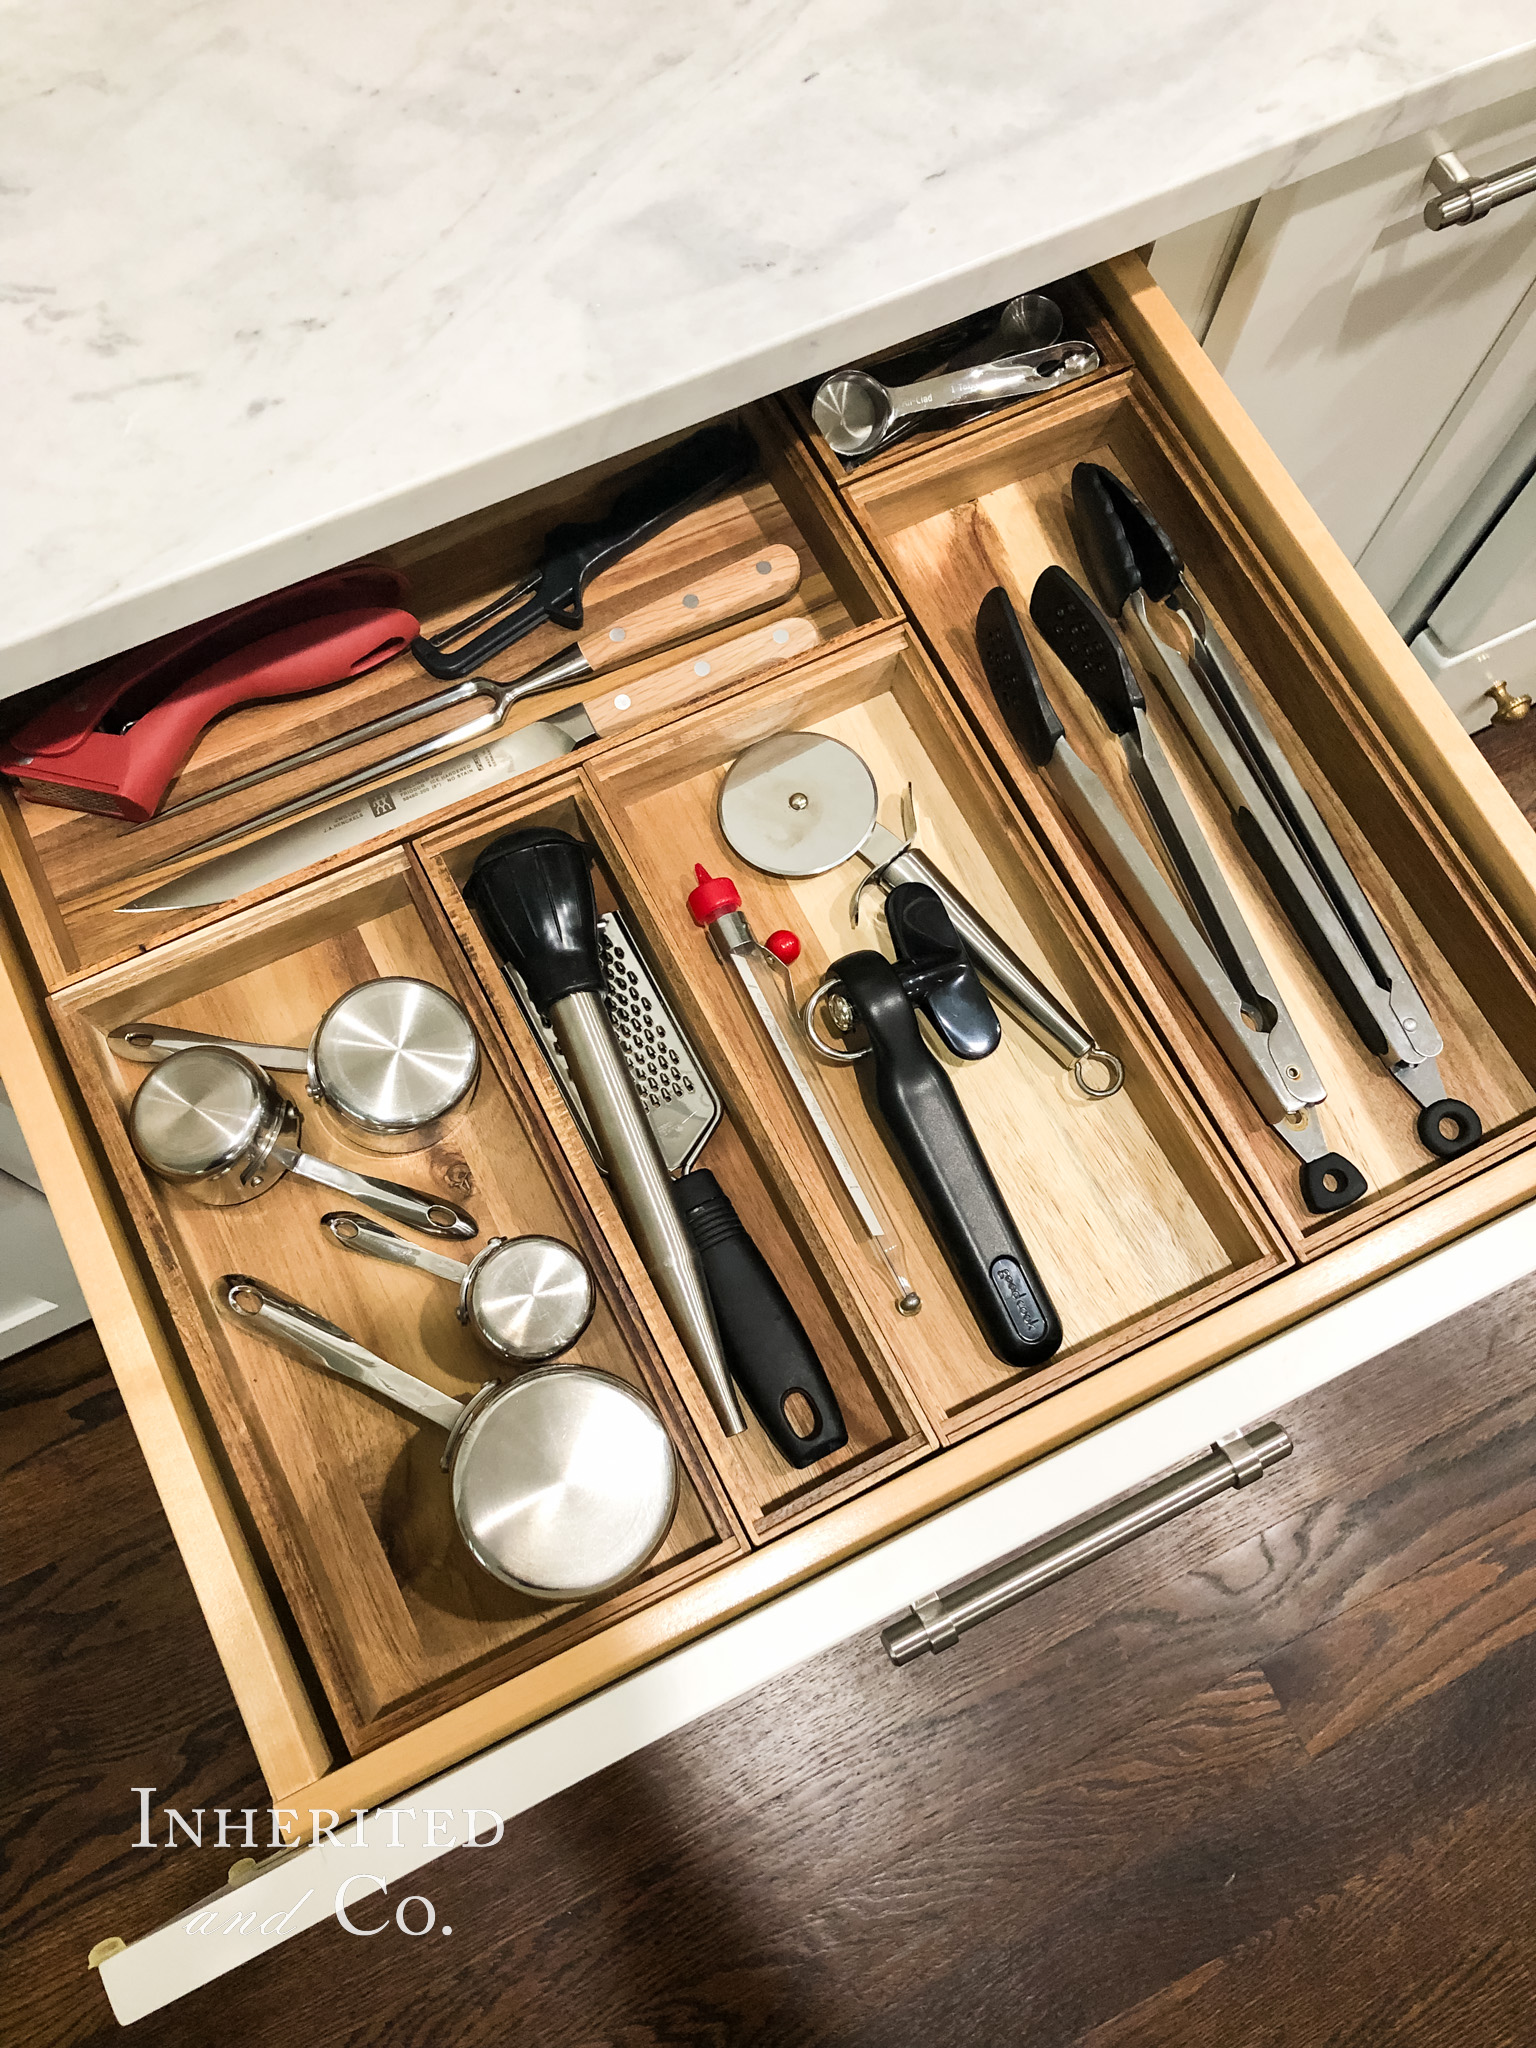 Organized kitchen gadget drawer with wooden containers